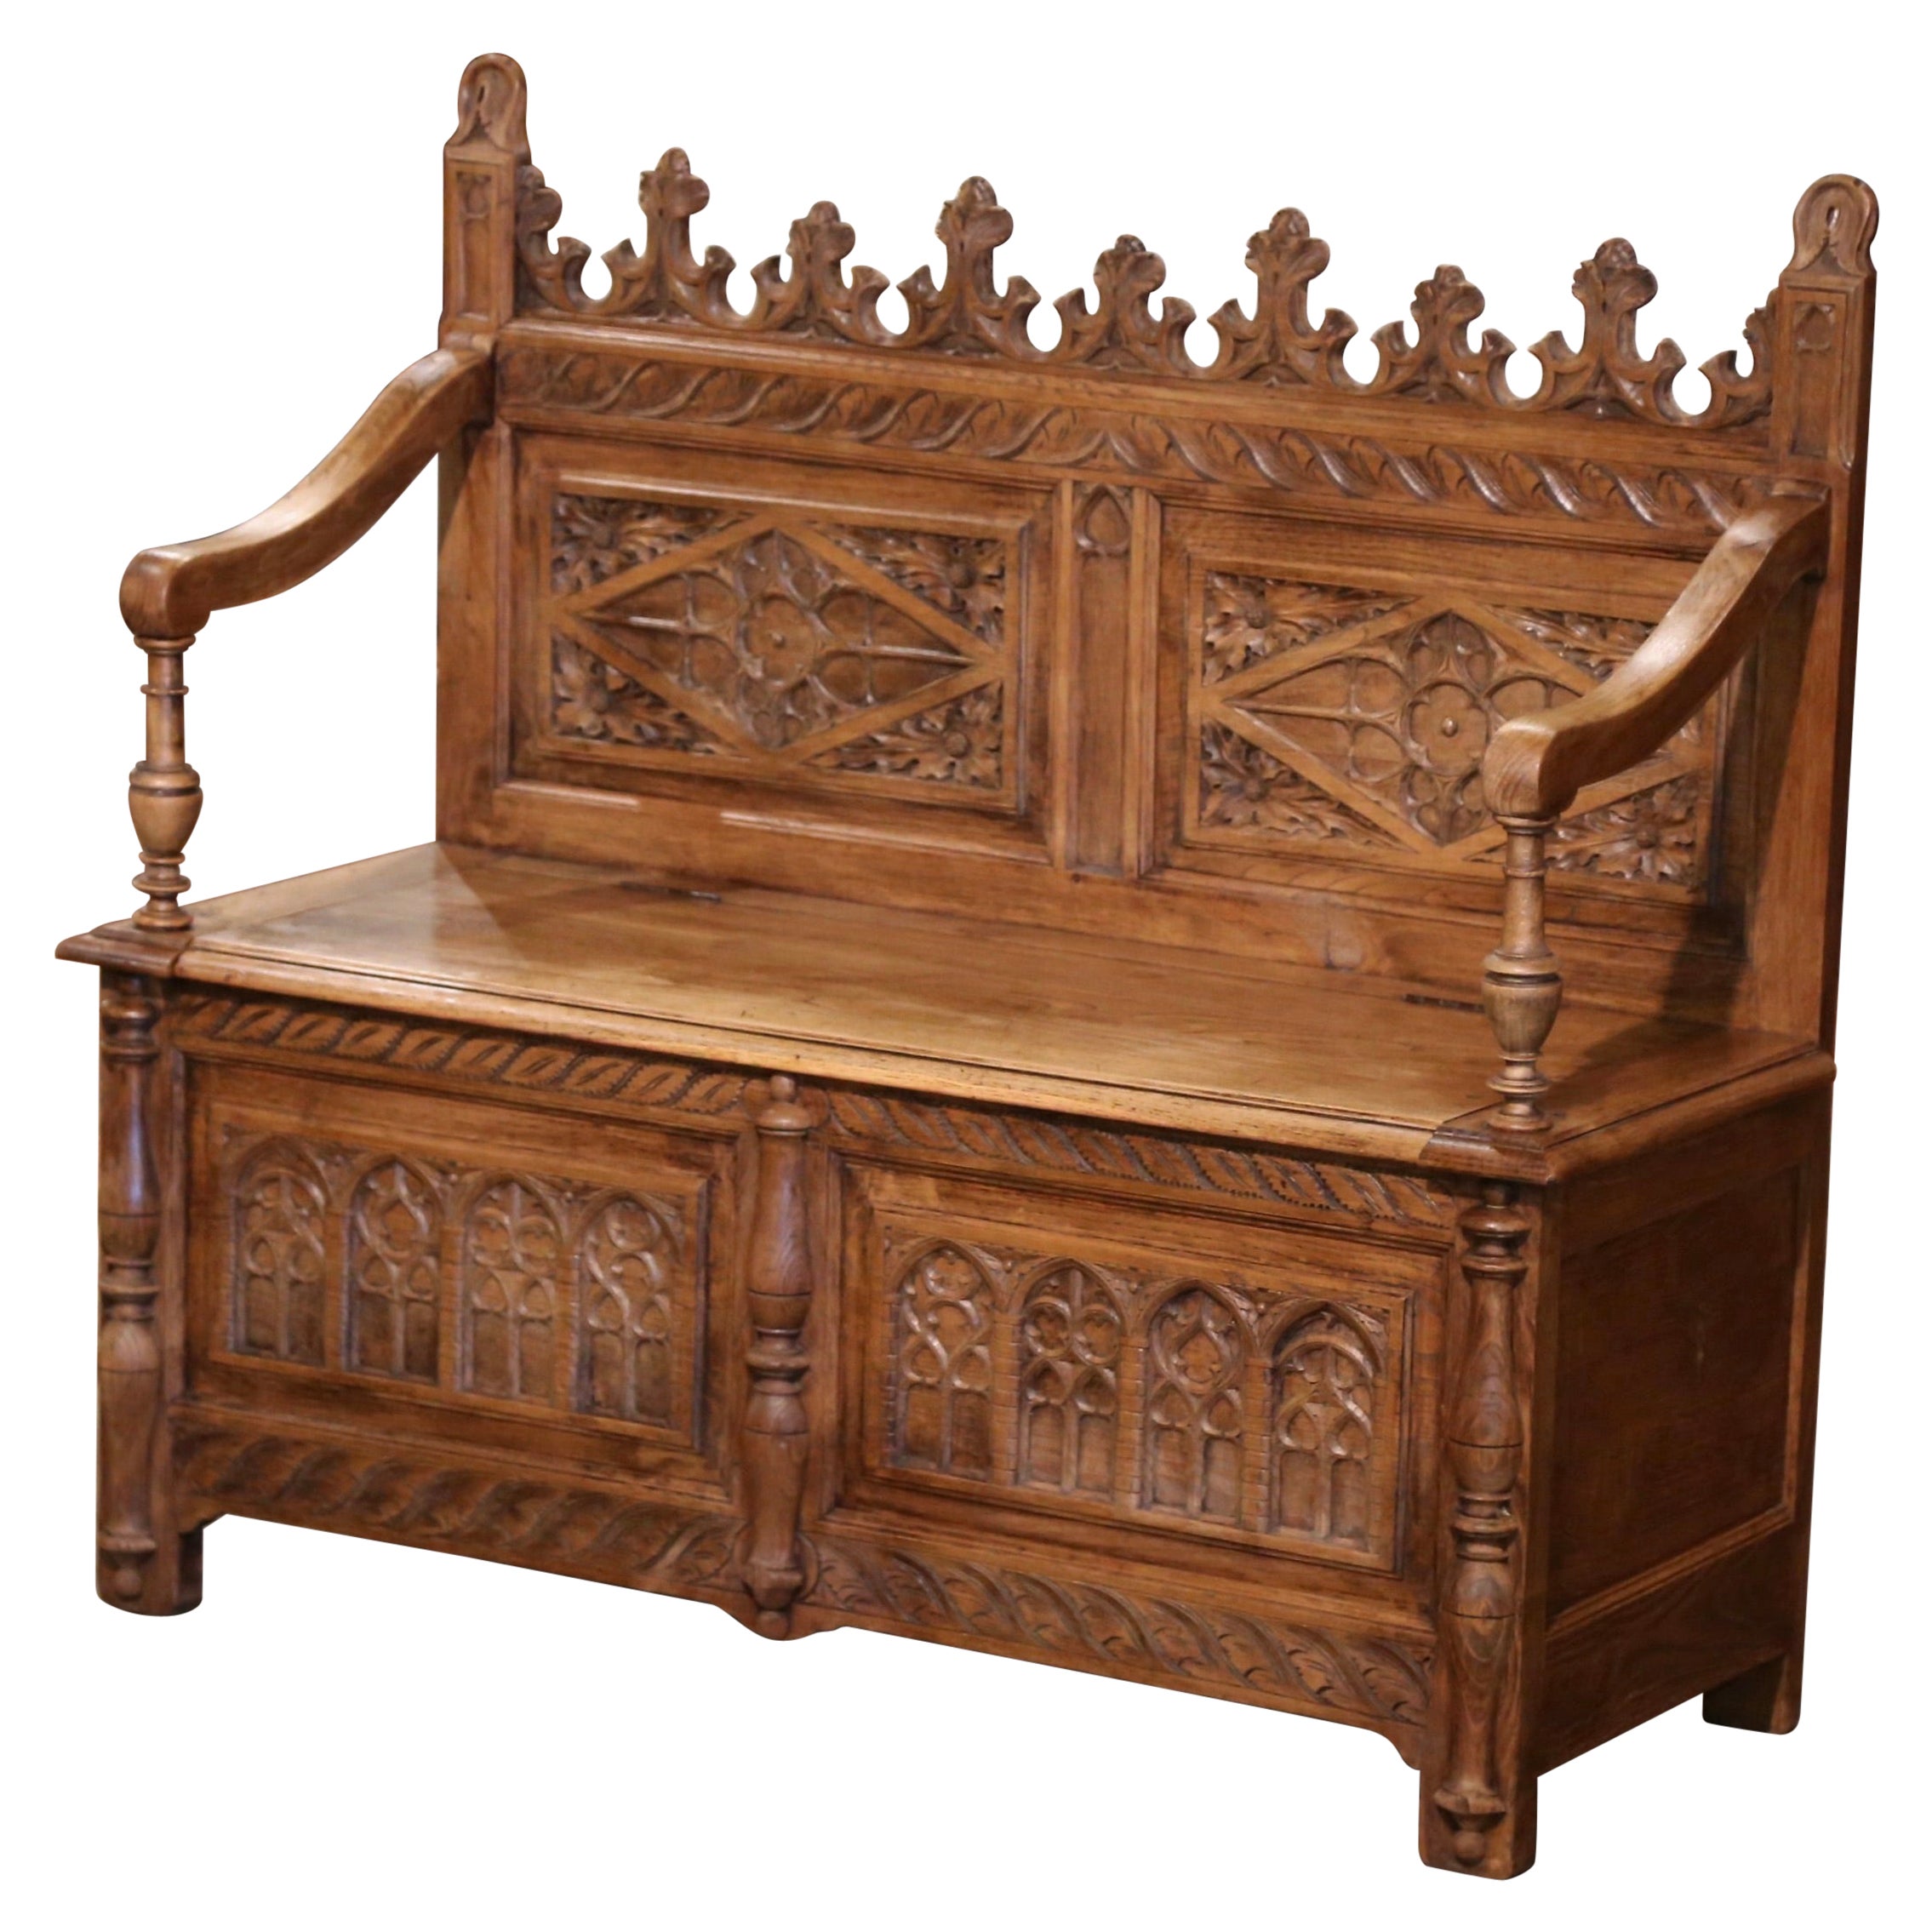 19th Century French Gothic Revival Carved Bleached Oak Hall Bench with Trapdoor For Sale